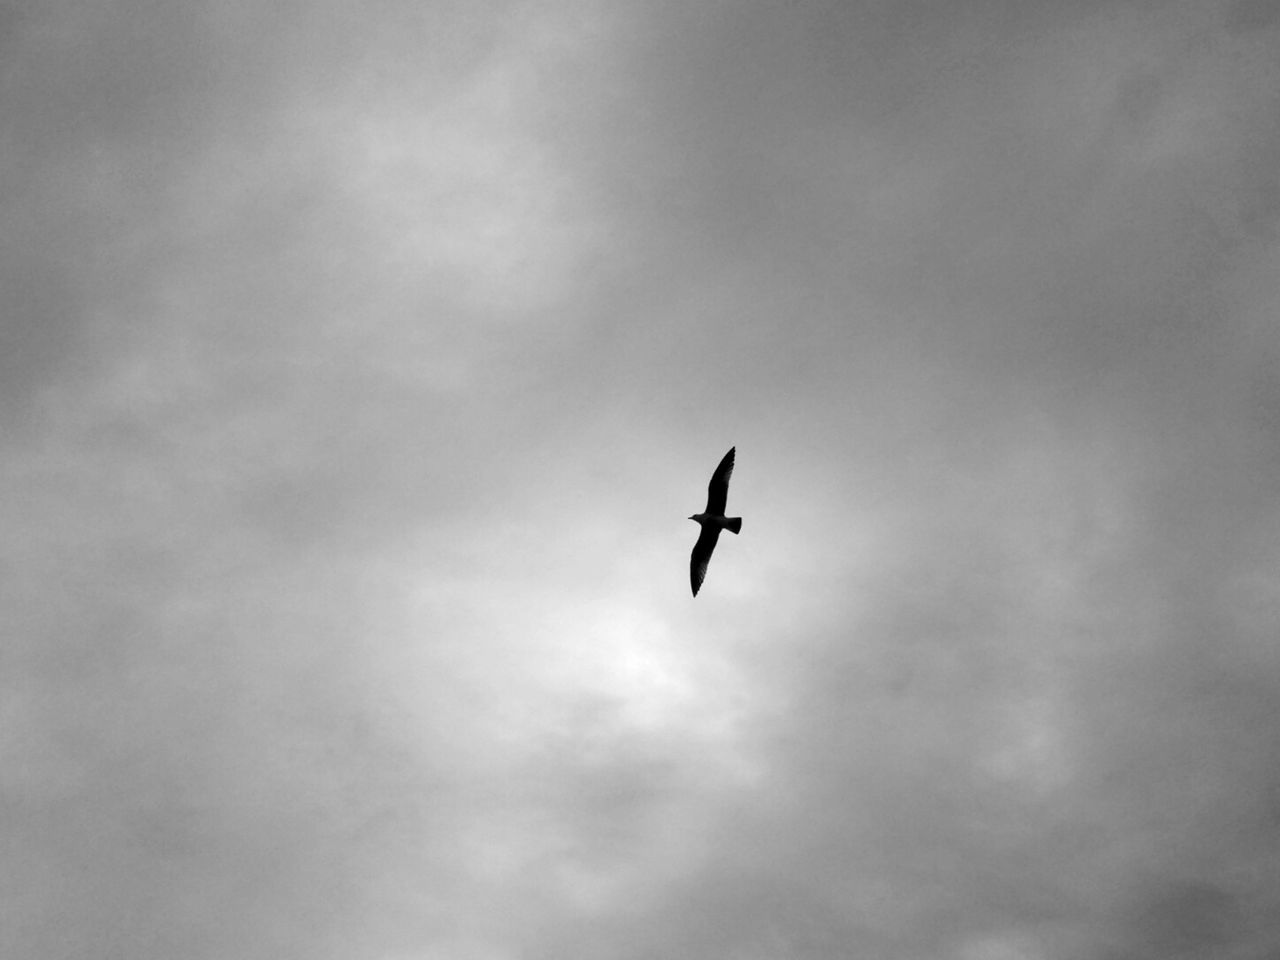 LOW ANGLE VIEW OF BIRD FLYING AGAINST CLOUDY SKY